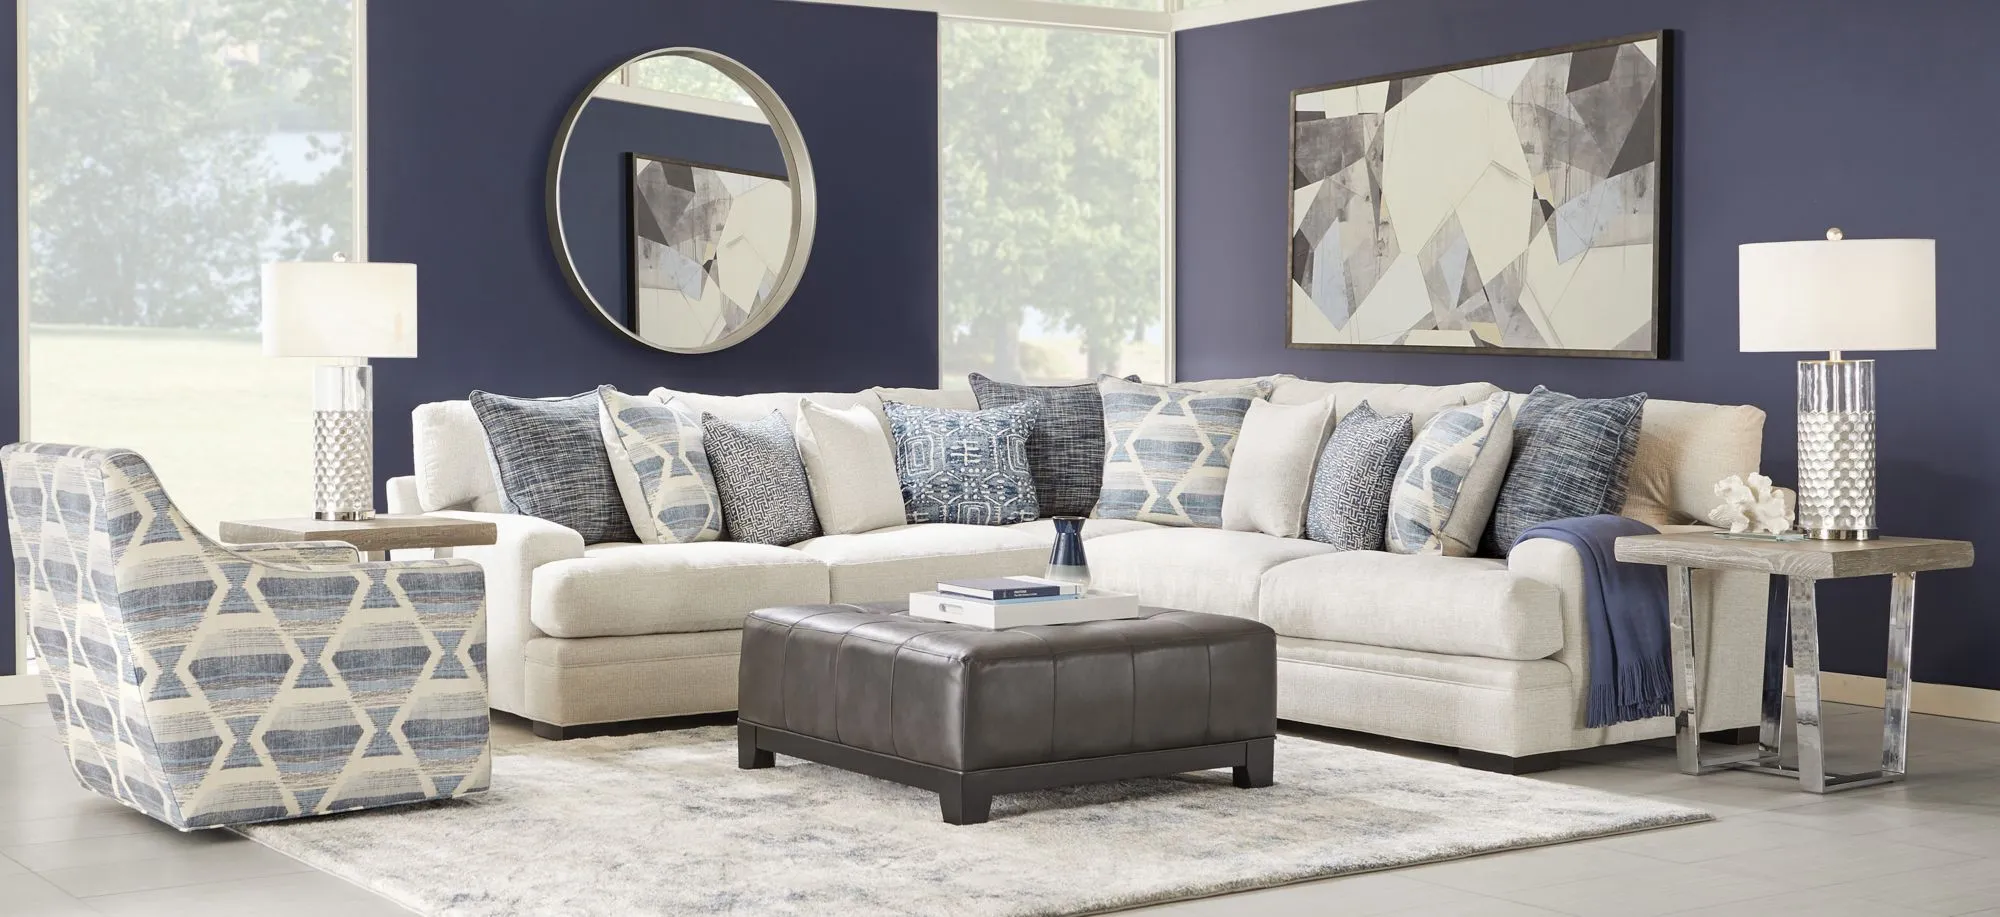 Braelyn 3-pc. Sectional in Braxton Ceramic by H.M. Richards